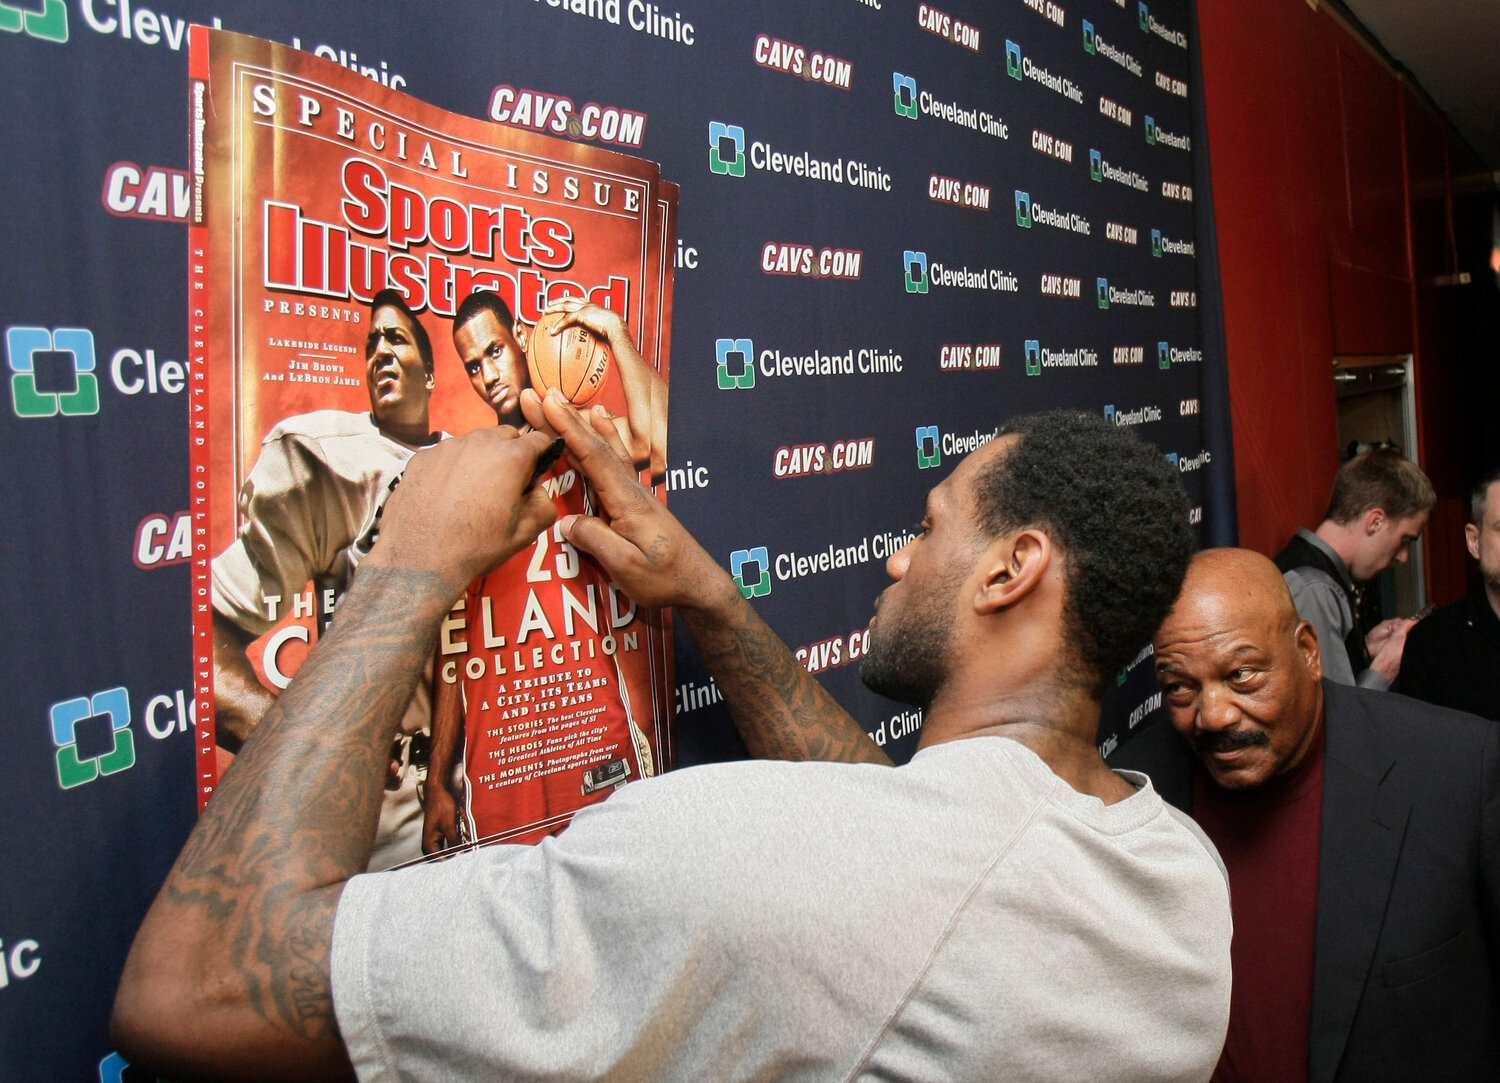 Cleveland Cavaliers' LeBron James, left, signs a copy of a Sports Illustrated cover as former Cleveland Browns football player Jim Brown watches, before an NBA game between the Cavaliers and the Toronto Raptors on Jan. 19, 2010, in Cleveland. The cover featured both James and Brown for the "Lakeside Legends" issue. “I hope every Black athlete takes the time to educate themselves about this incredible man and what he did to change all of our lives,” James posted shortly after Brown's death. ”We all stand on your shoulders Jim Brown. If you grew up in Northeast Ohio and were Black, Jim Brown was a God."